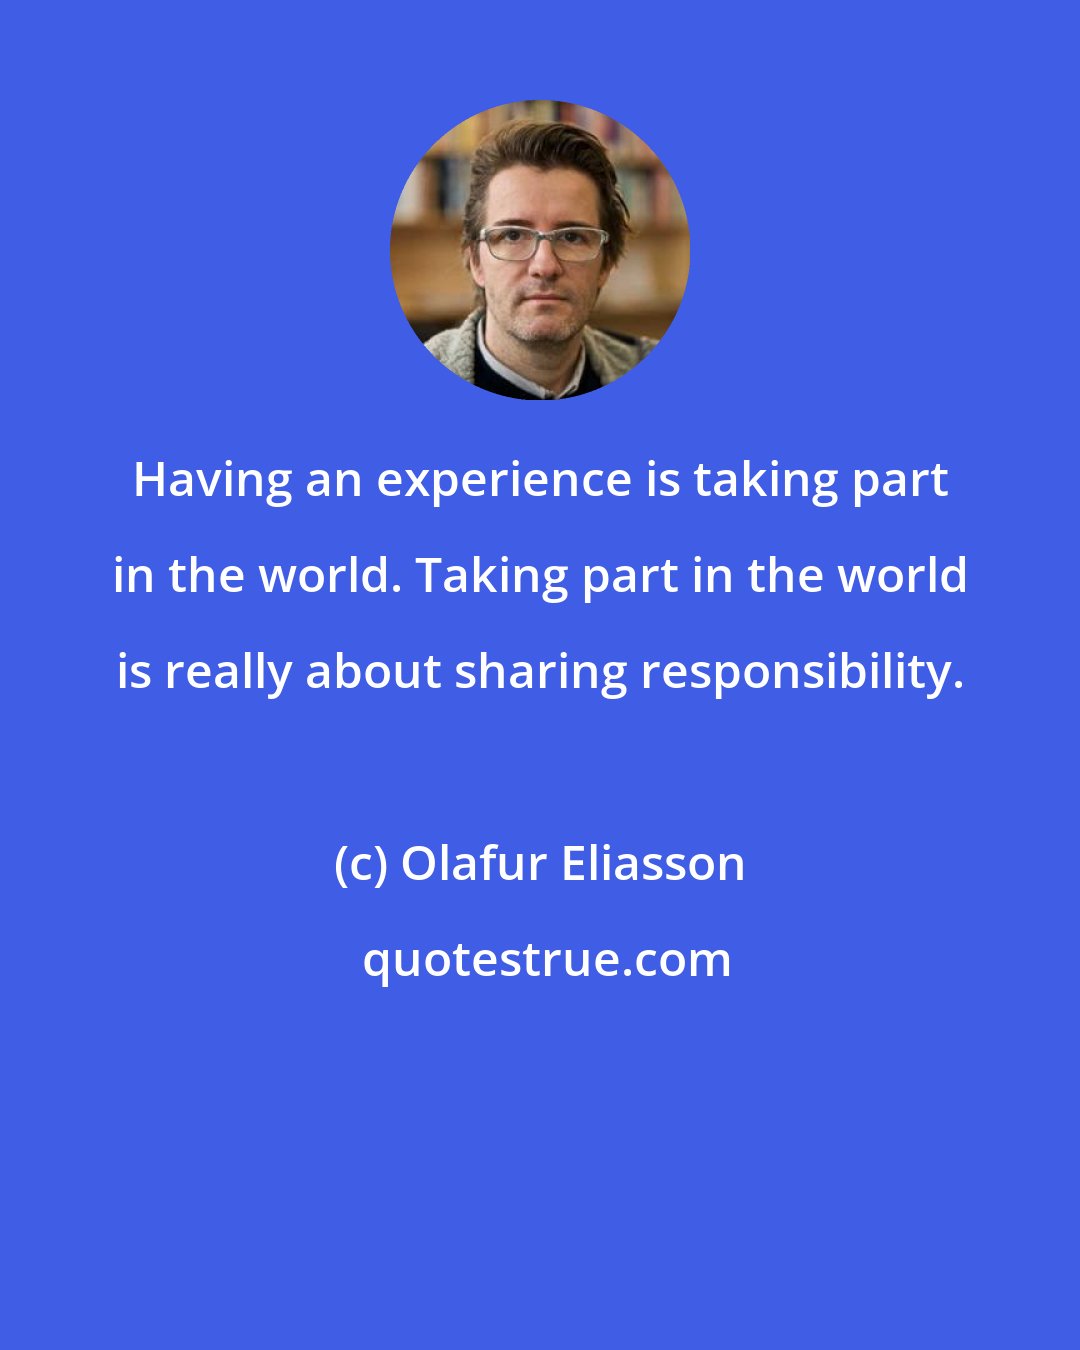 Olafur Eliasson: Having an experience is taking part in the world. Taking part in the world is really about sharing responsibility.